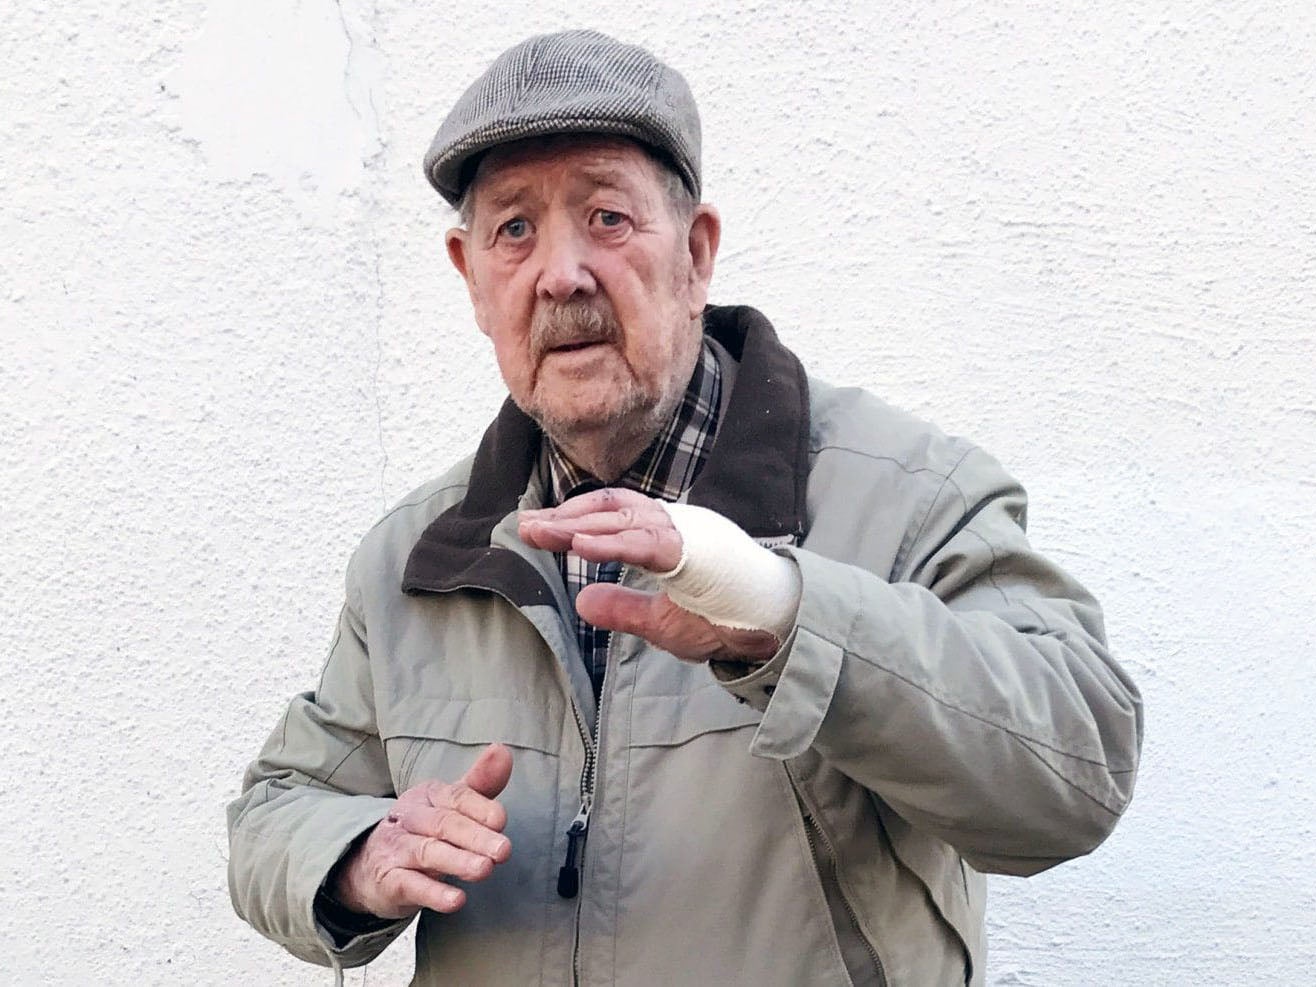 Five robbers armed with knife attack young woman, then 88-year-old former commando arrives